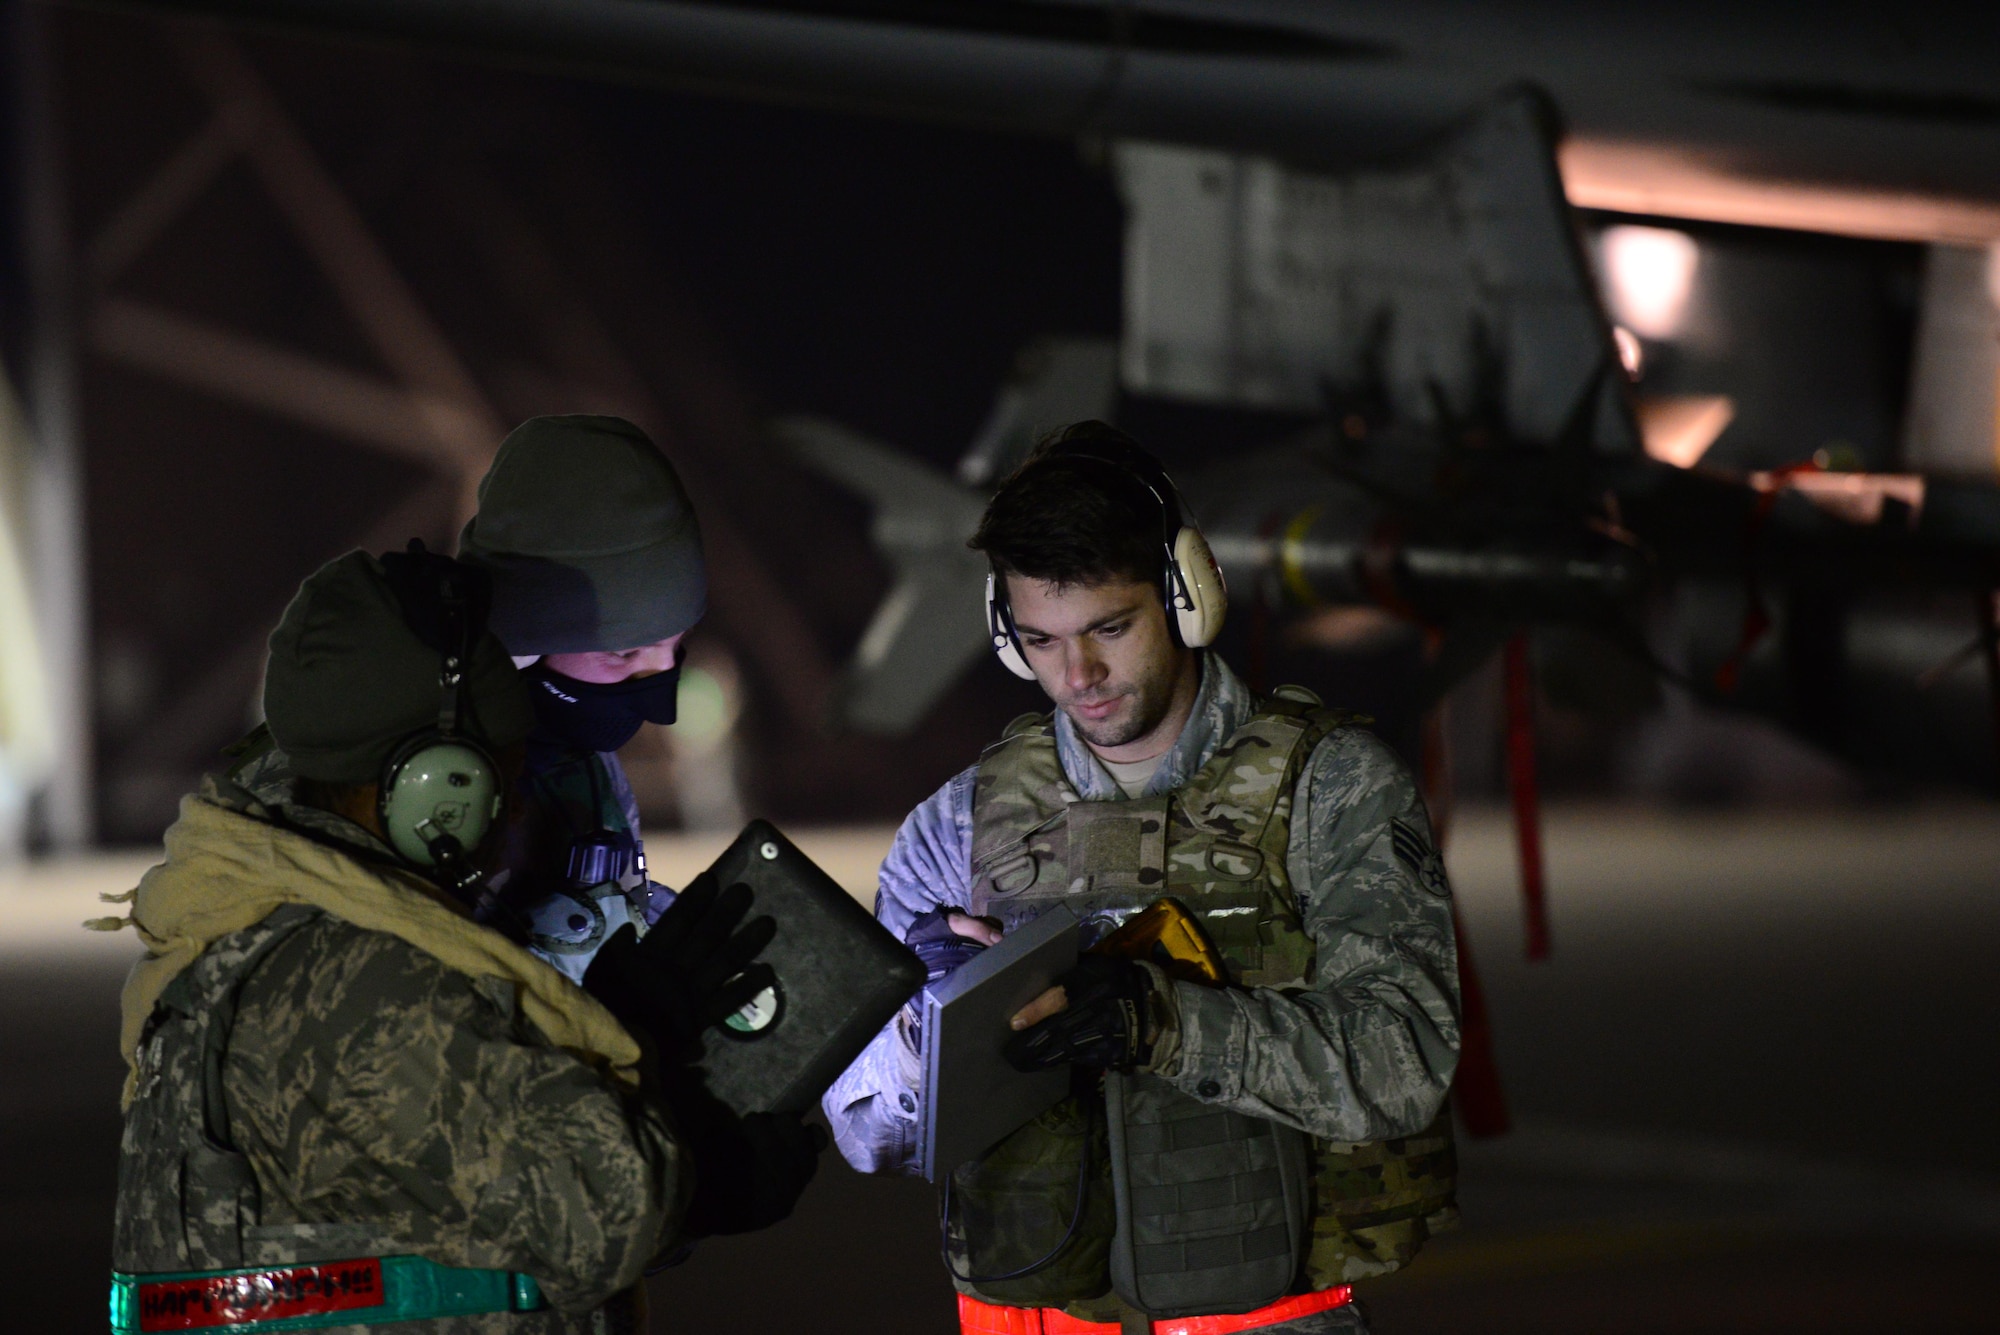 Senior Airmen Jonathon Simmons, 25th Aircraft Maintenance Unit load master, reviews system operational guidelineswith his crew during the first night of Vigilant Ace 16 at Osan Air Base, Republic of Korea, Nov. 2, 2015. Vigilant Ace is a peninusla wide operational readiness exercise geared toward strengthing the interoperability of the ROK/U.S.  alliance. 
(U.S. Air Force photo/Staff Sgt. Amber Grimm)